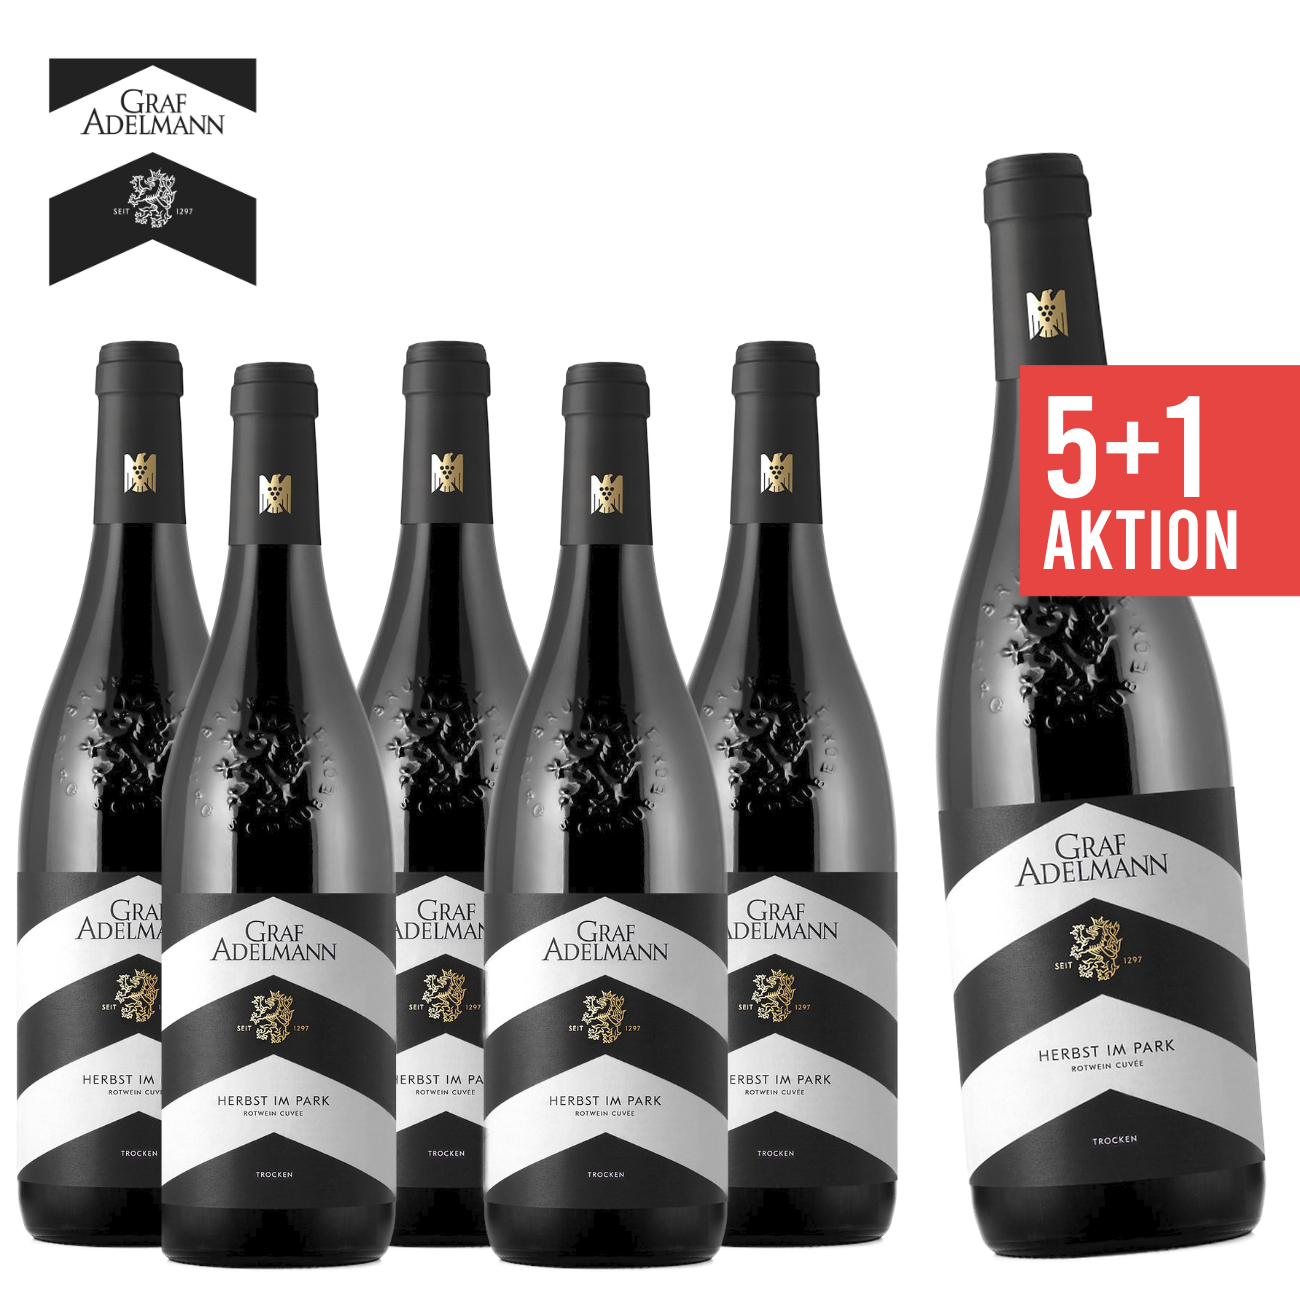 of | wines members wein.plus find+buy: The wein.plus find+buy our